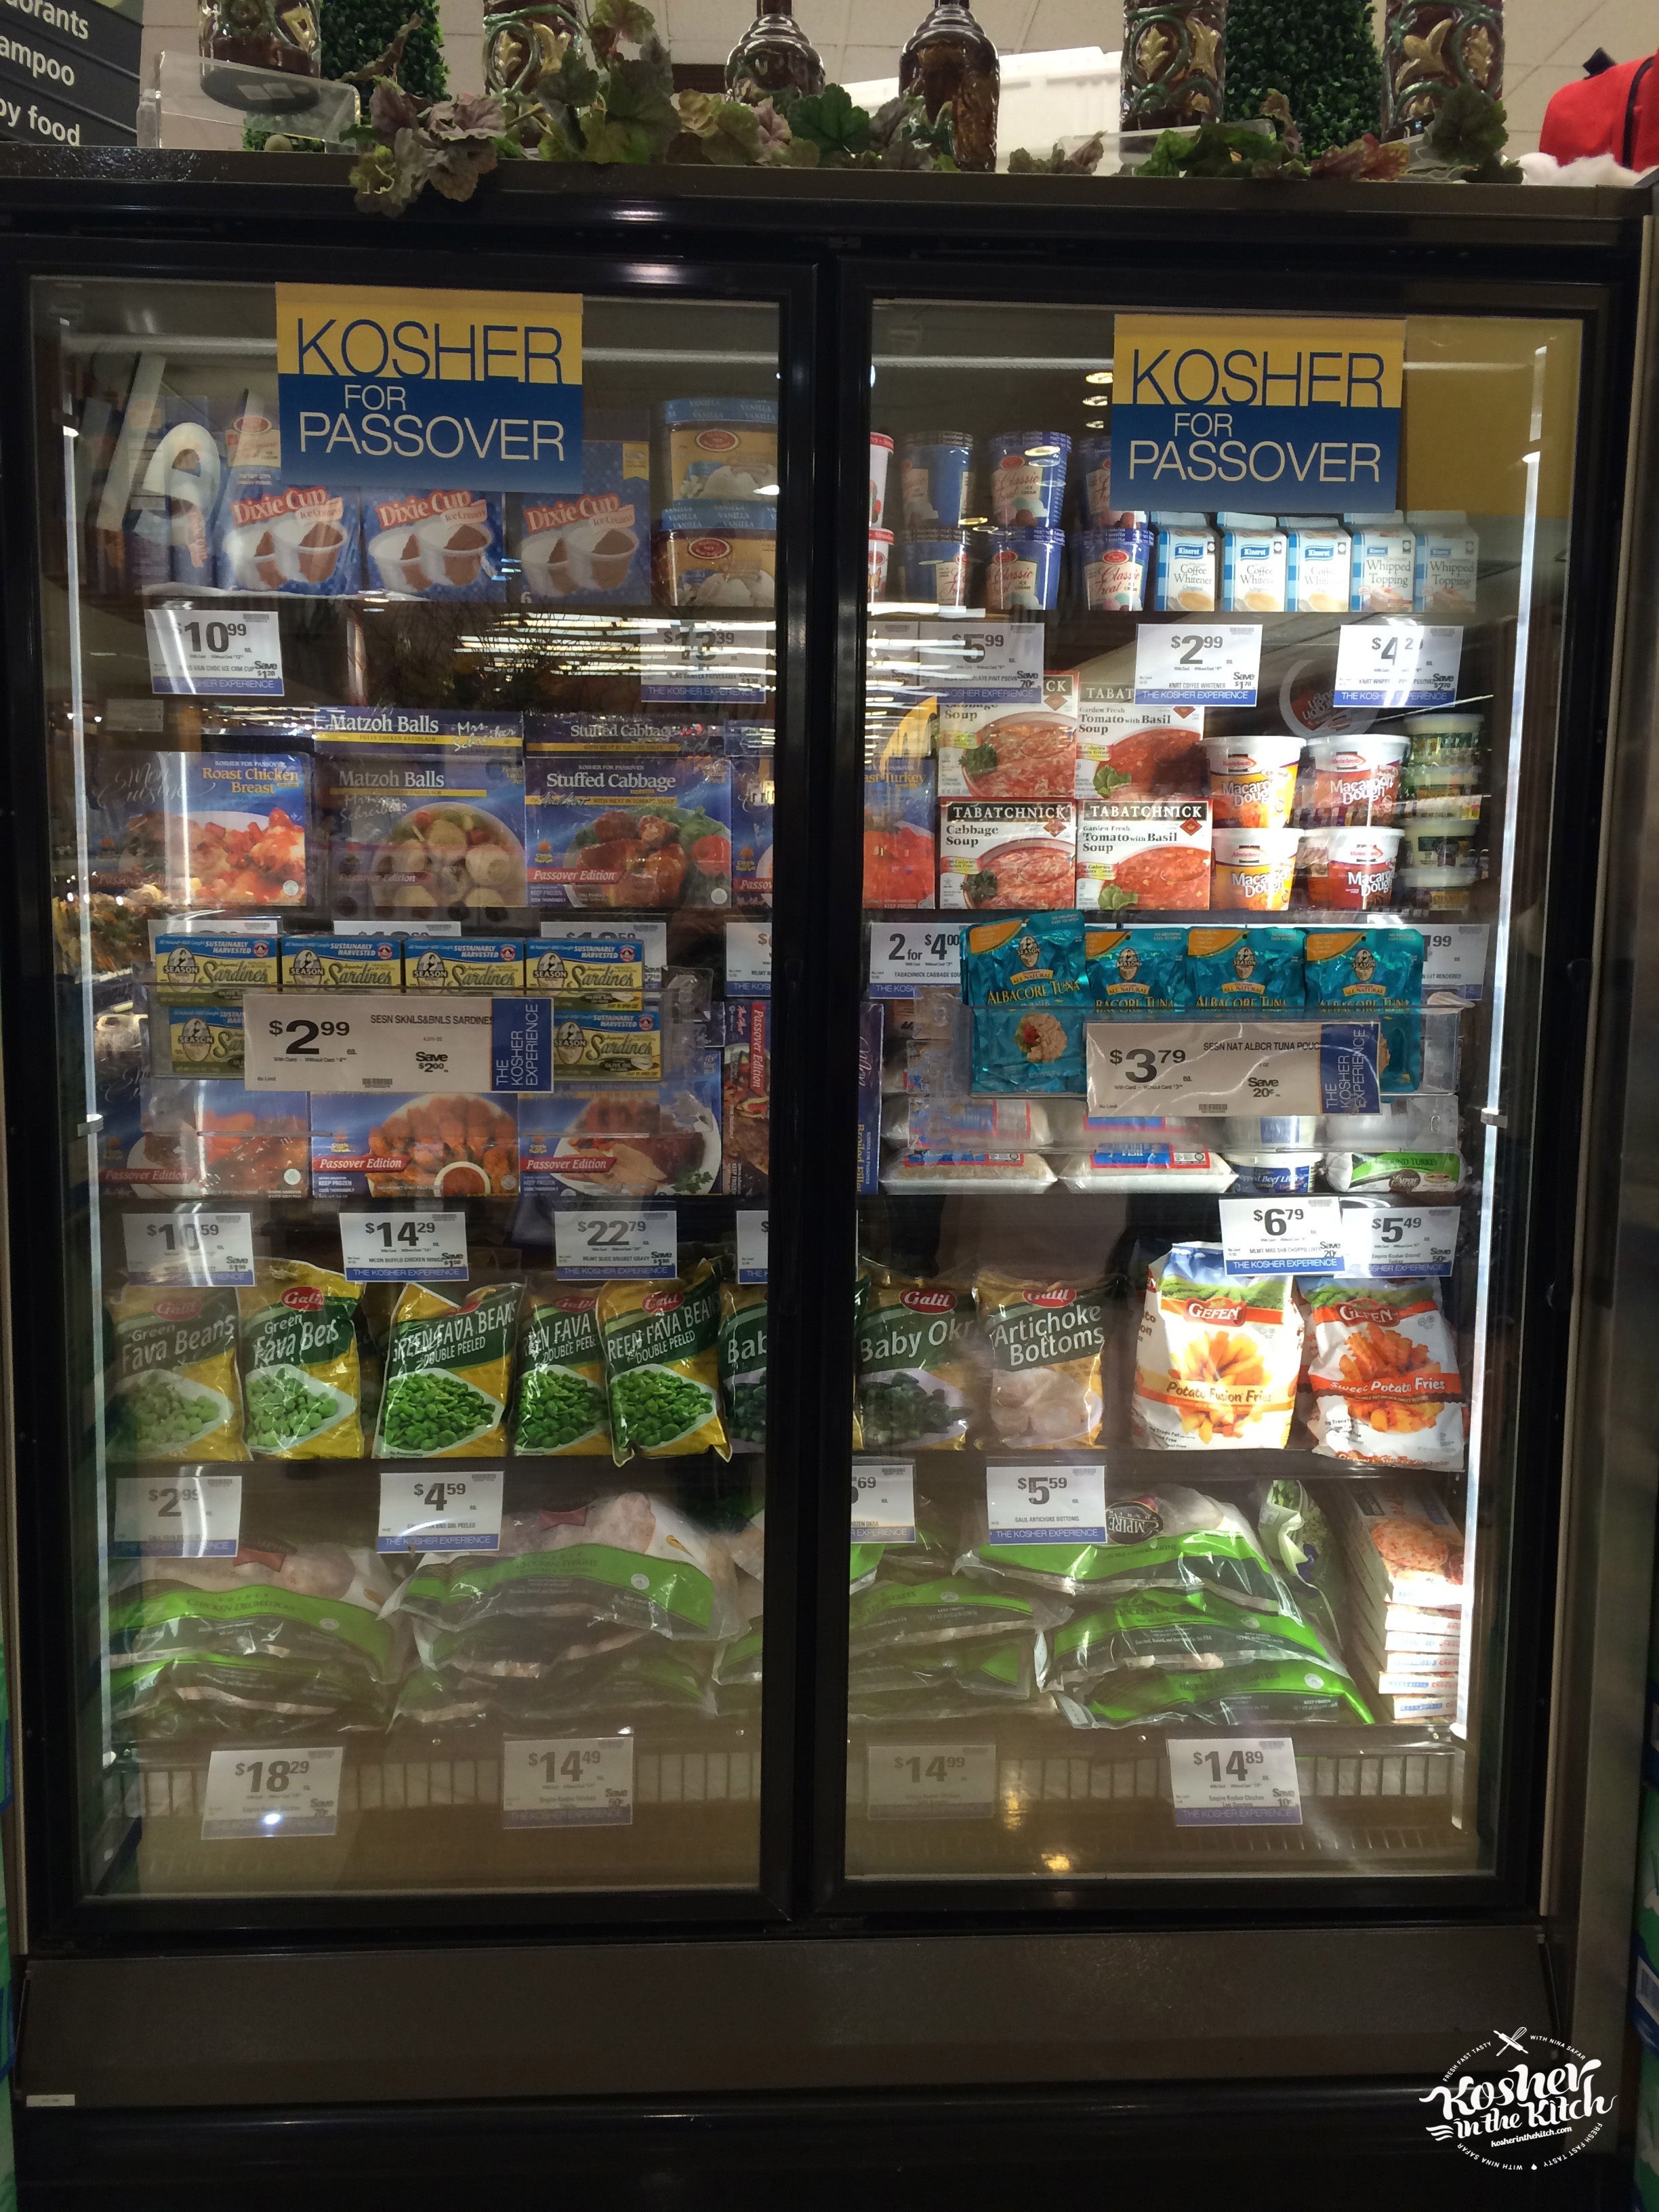 Kosher products for Passover at Ralphs